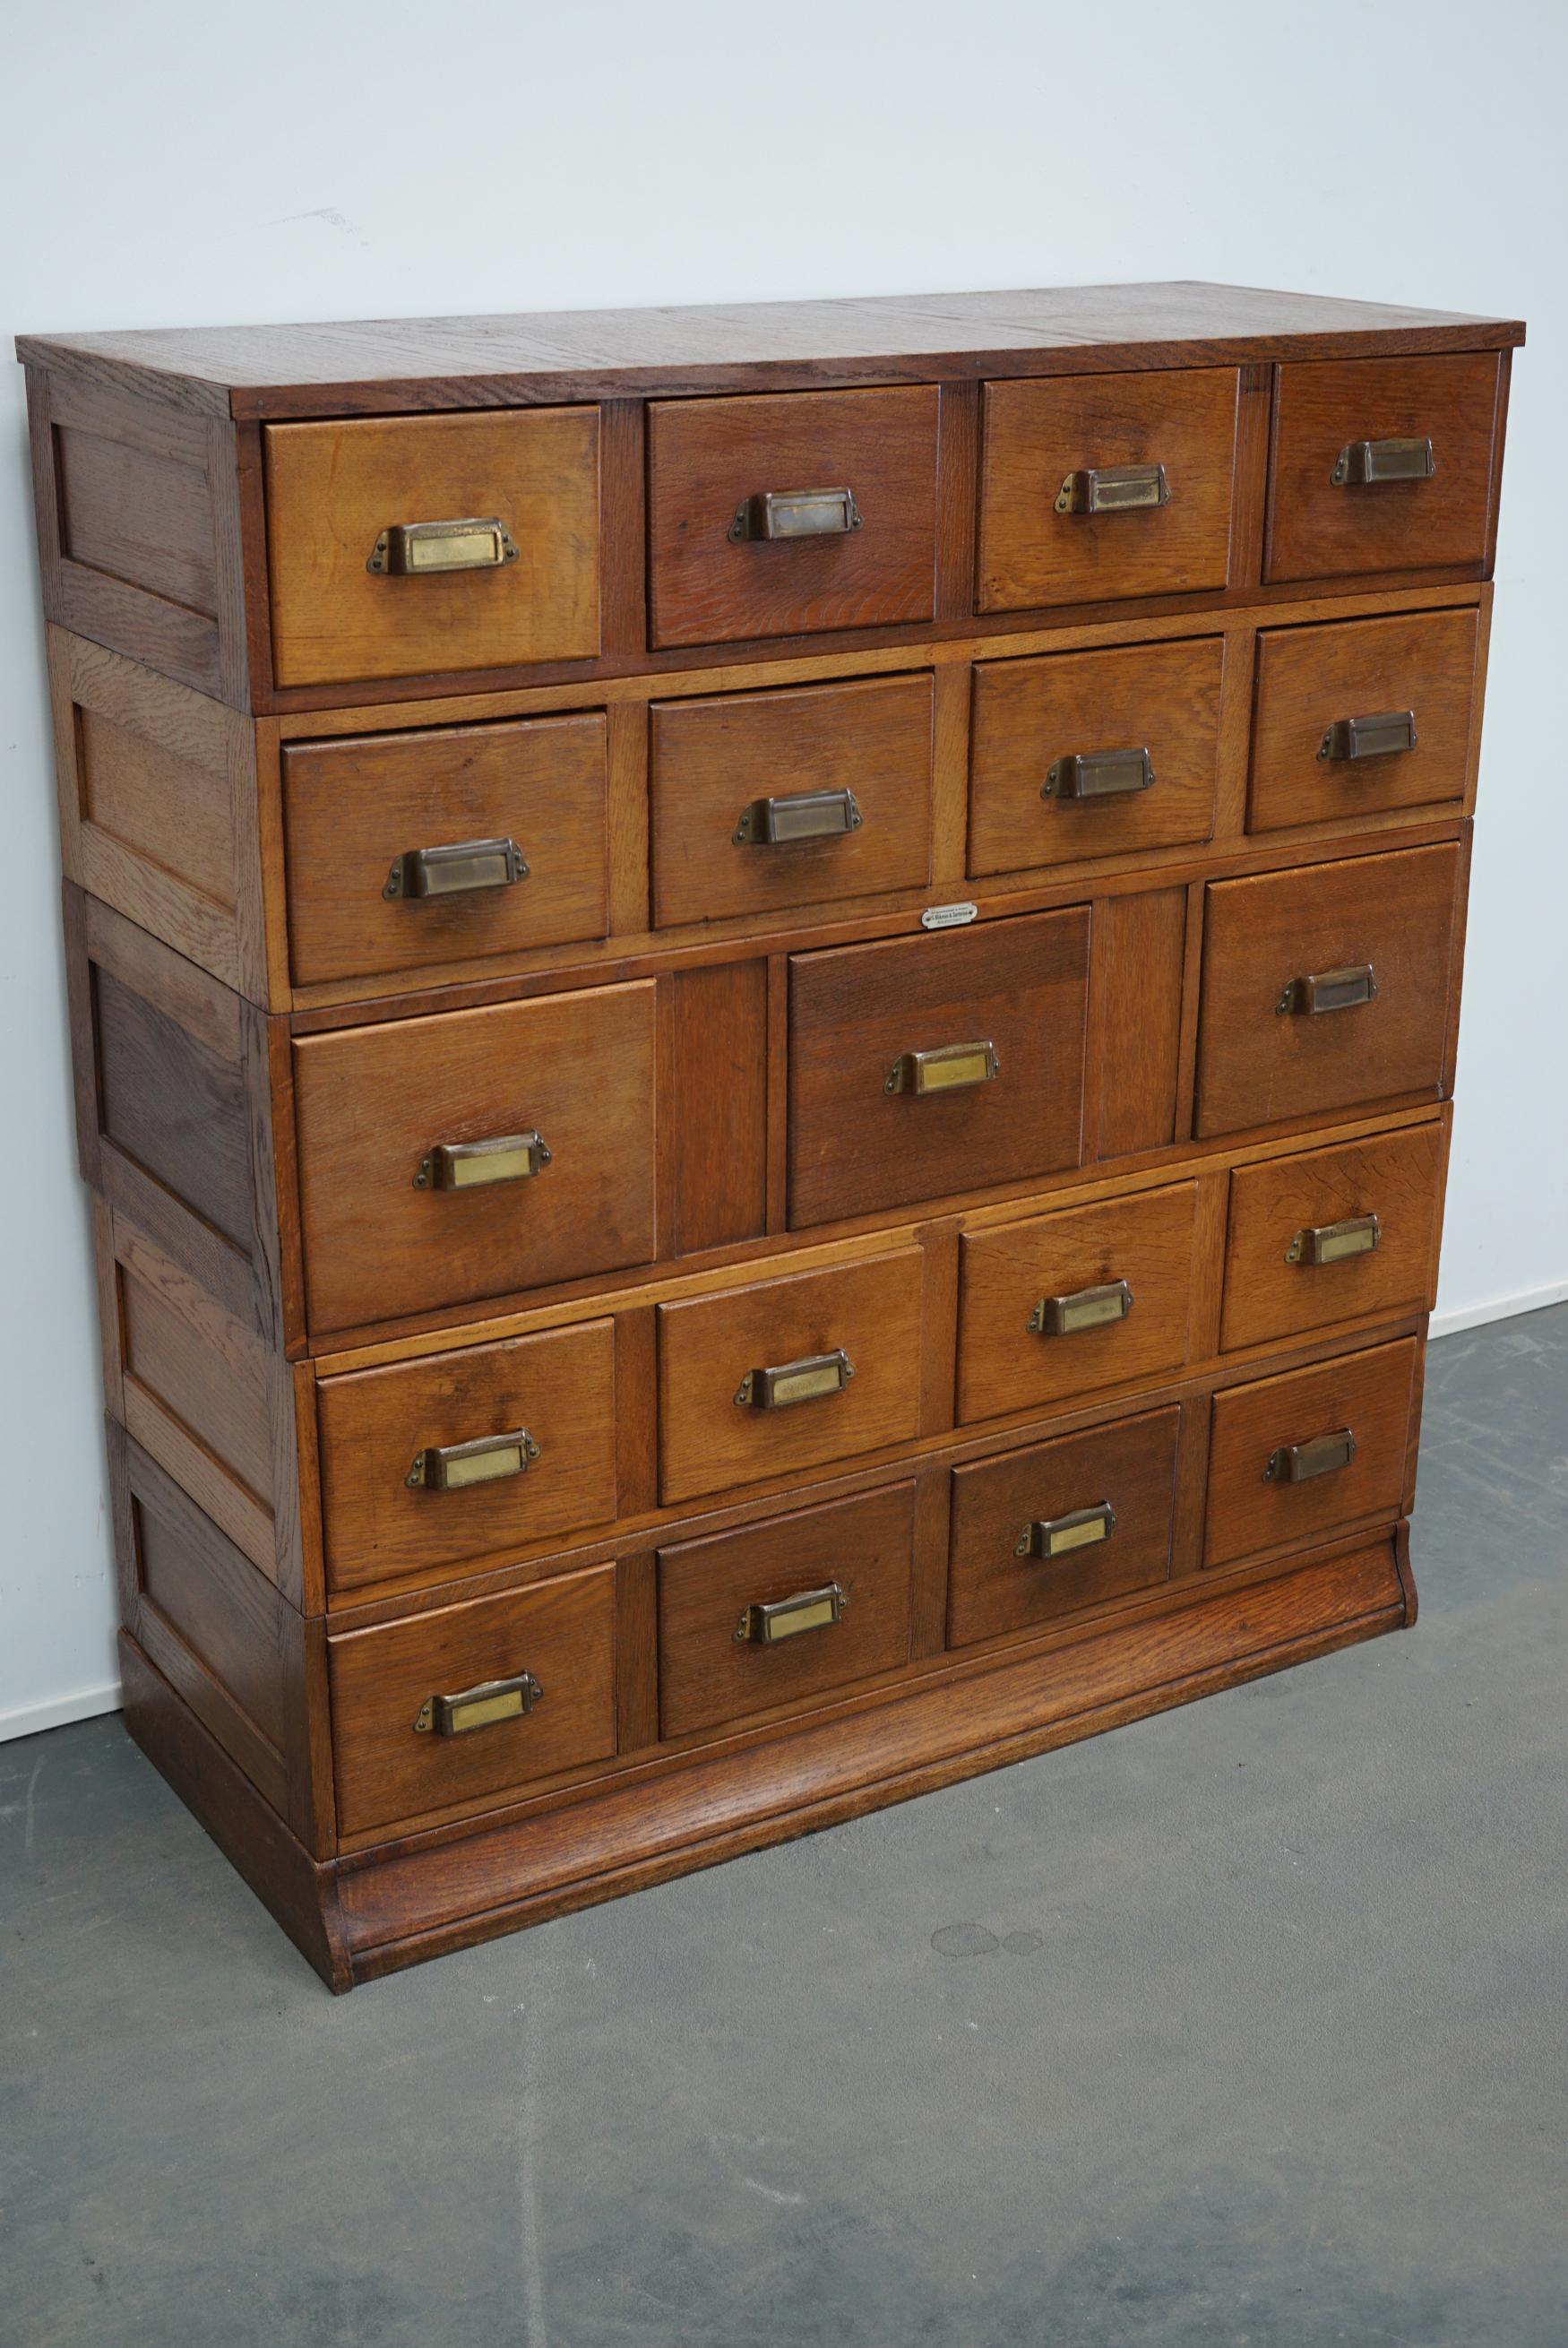 This apothecary cabinet was produced during the 1930s in the Netherlands. This stackable piece features 19 drawers with nice brass cup handles. The interior dimensions of the drawers are: D x W x H 35 x 20 x 10 / 14 cm and 35 x 23 x 14 / 18 cm for